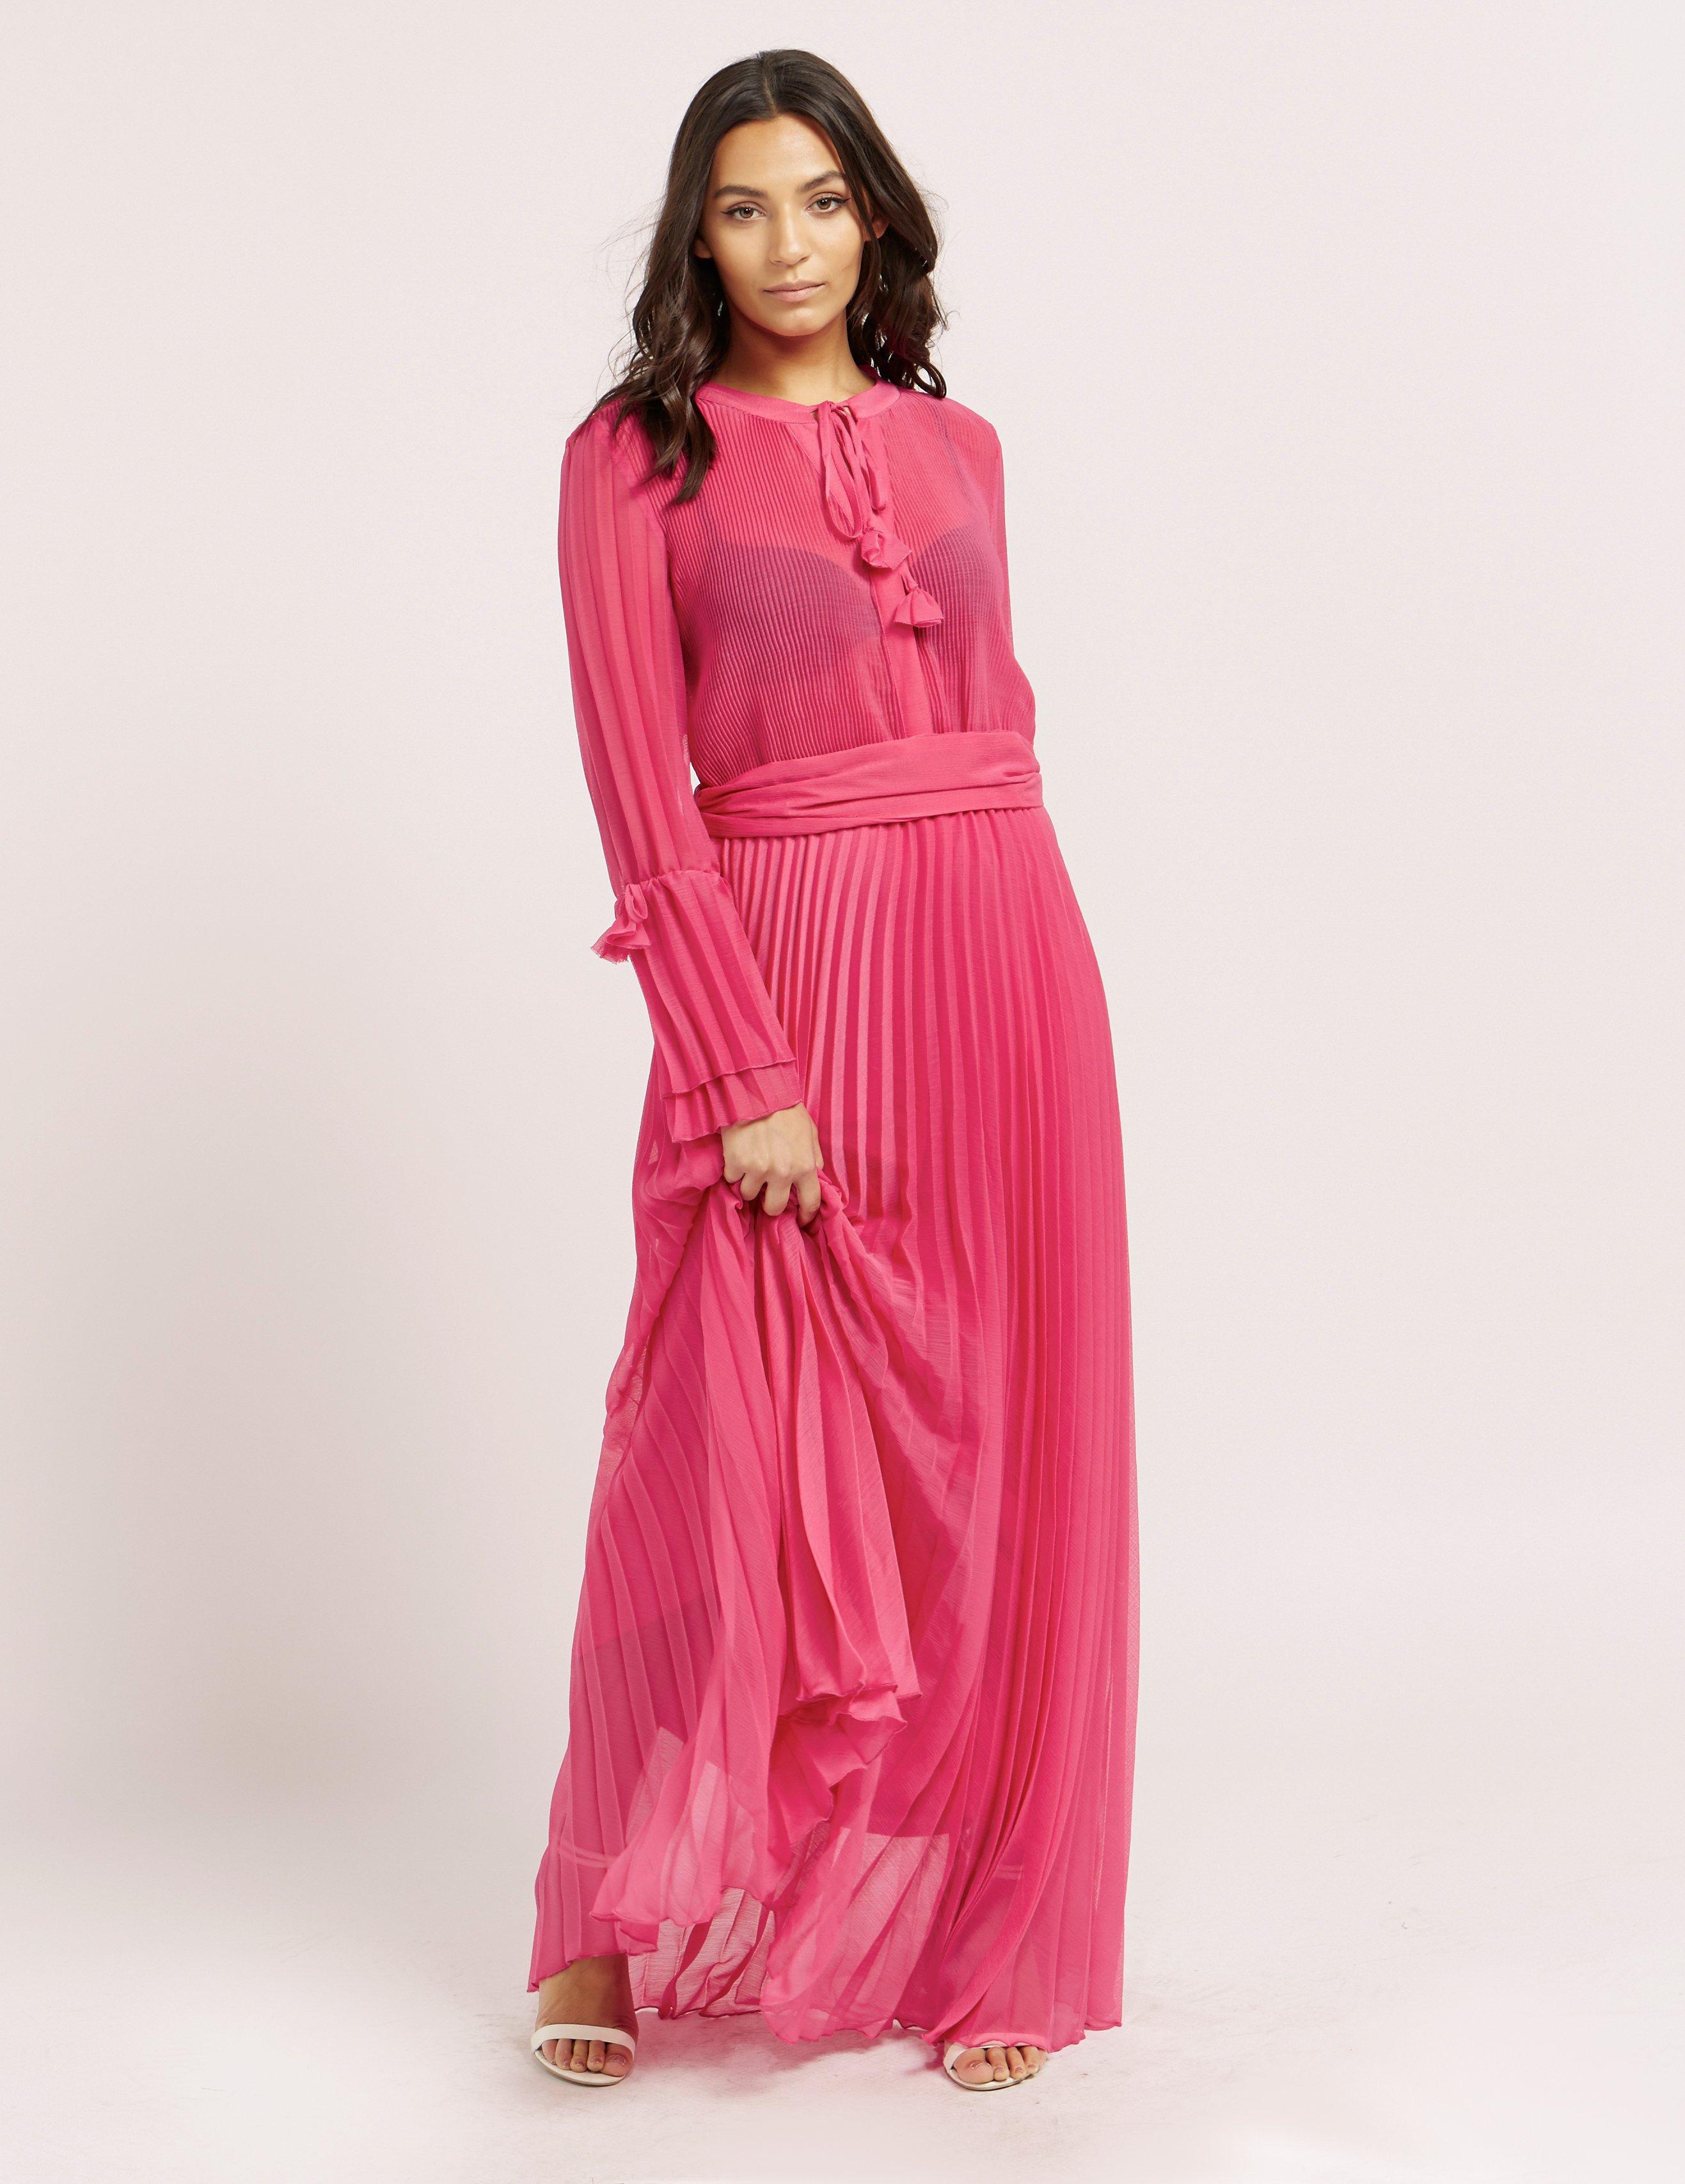 Ilse Jacobsen Pleated Maxi Dress in Pink - Lyst